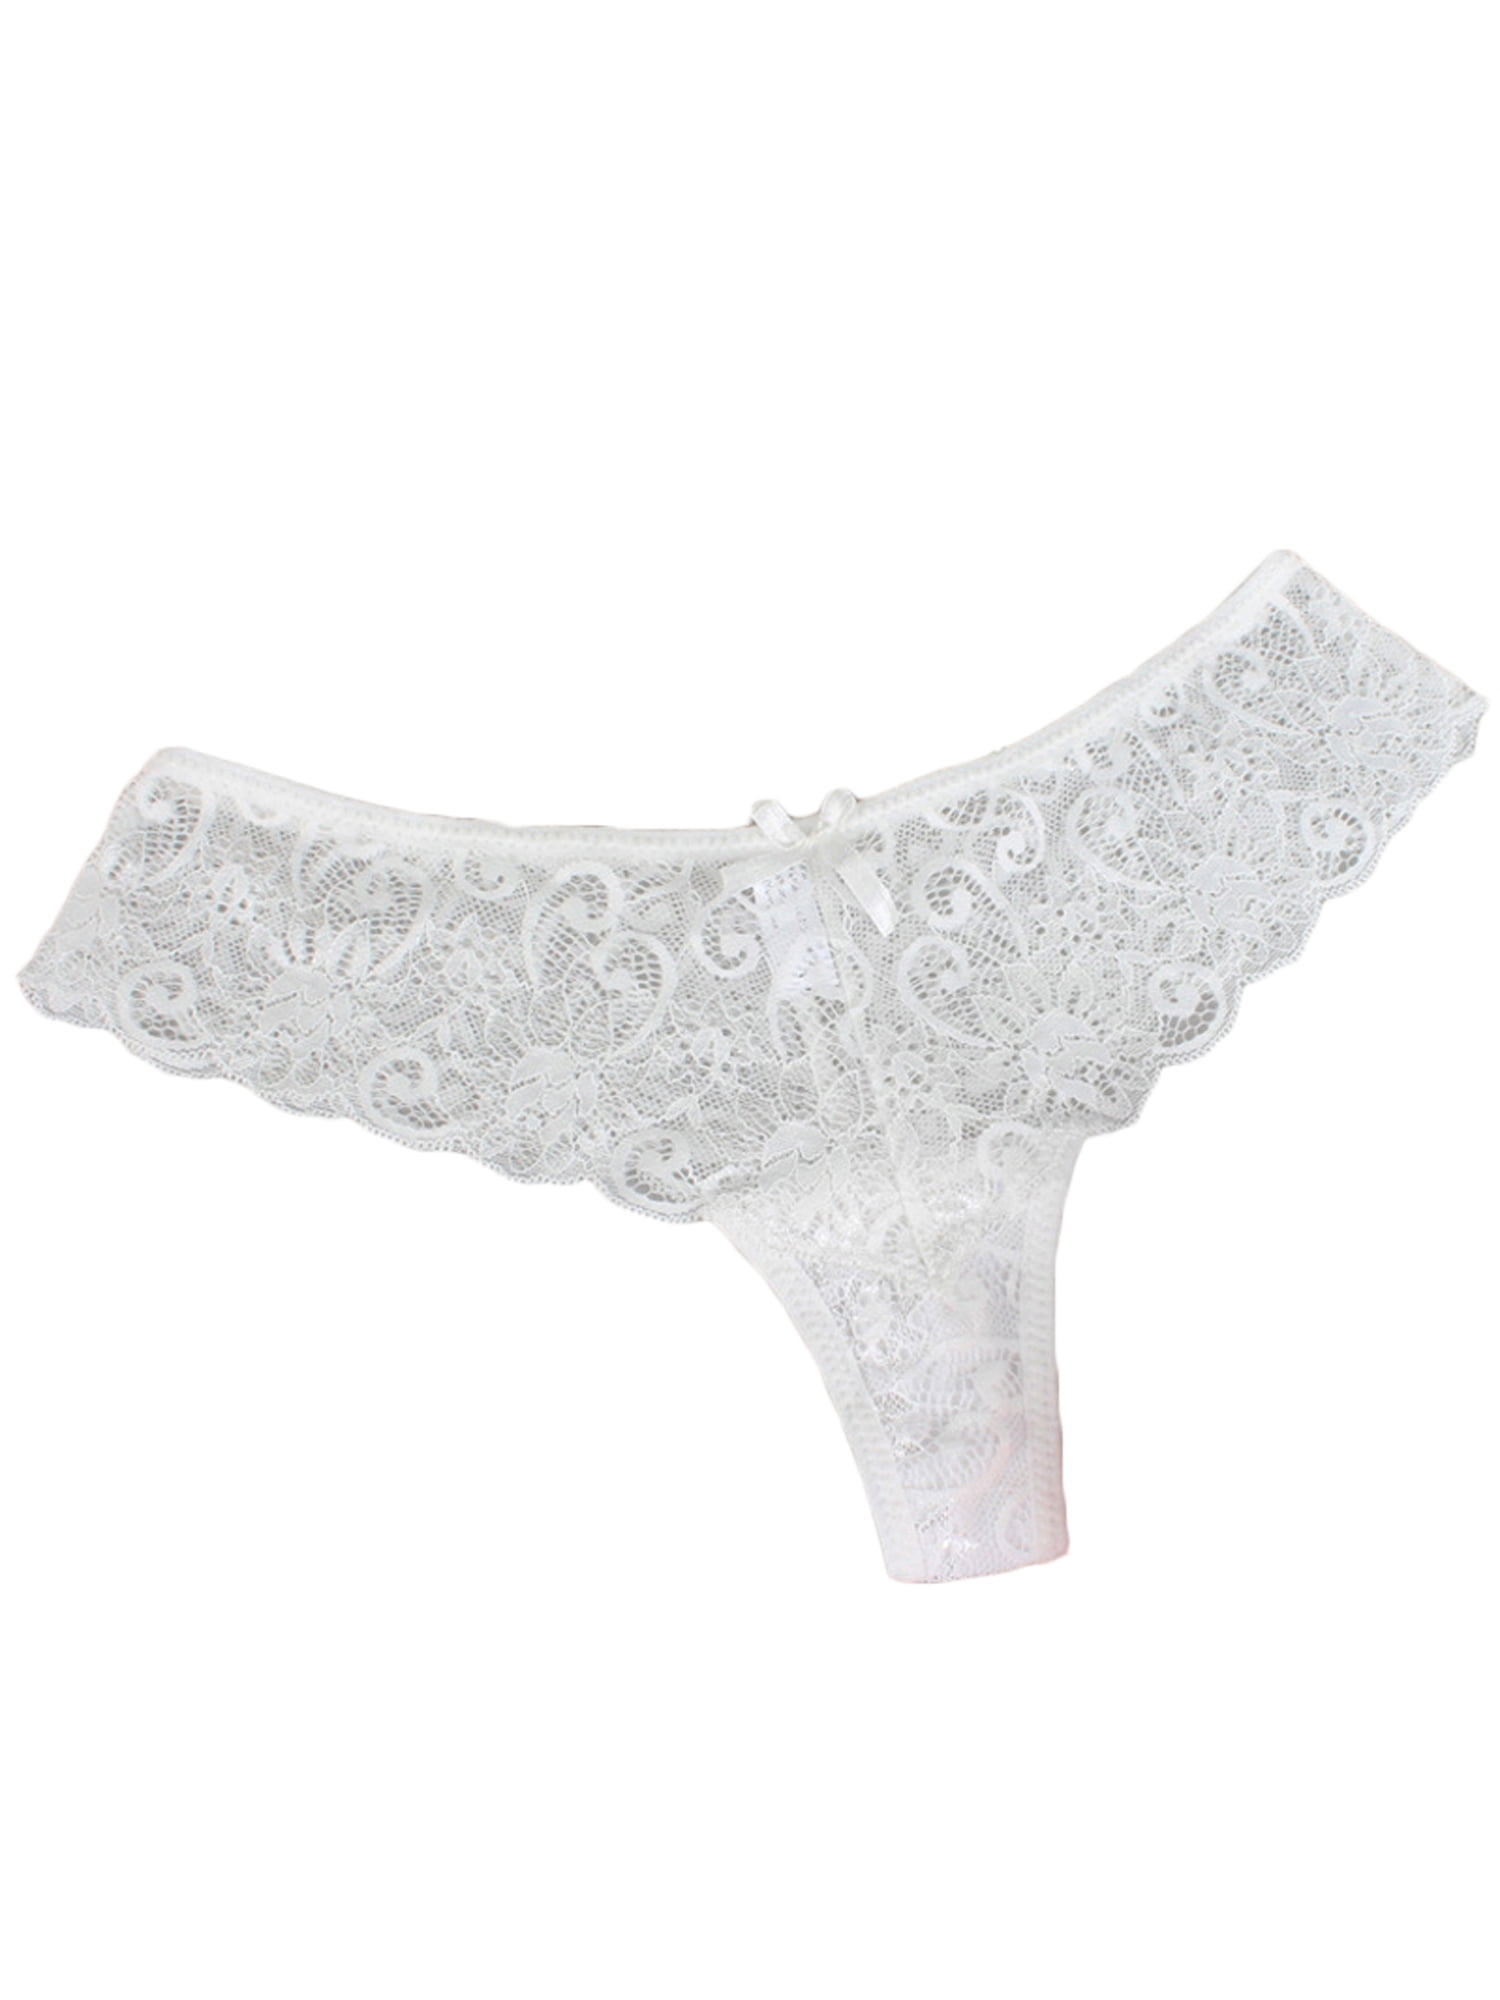 Wodstyle Womens Sexy G String Lace Thong Seamless Panties Lingerie Party Underwear Walmart 